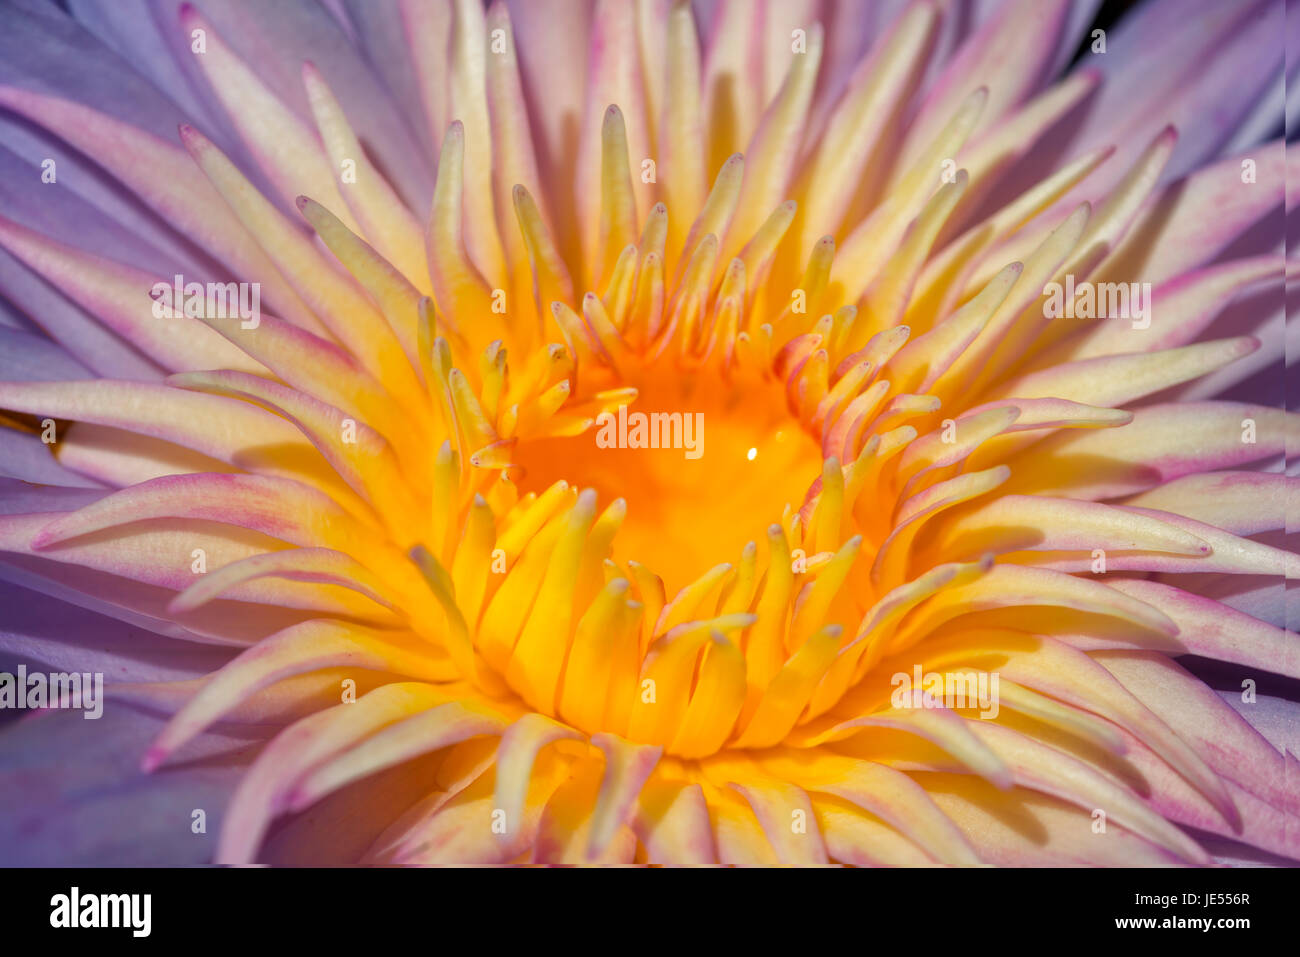 This water lily (Nymphaea sp.) impresses with the bright yellow color at the middle of the flower surrounded by light purple petals. The flowers and round leaves are floating at the surface of the water, while the plant is rooted in the soil. Stock Photo